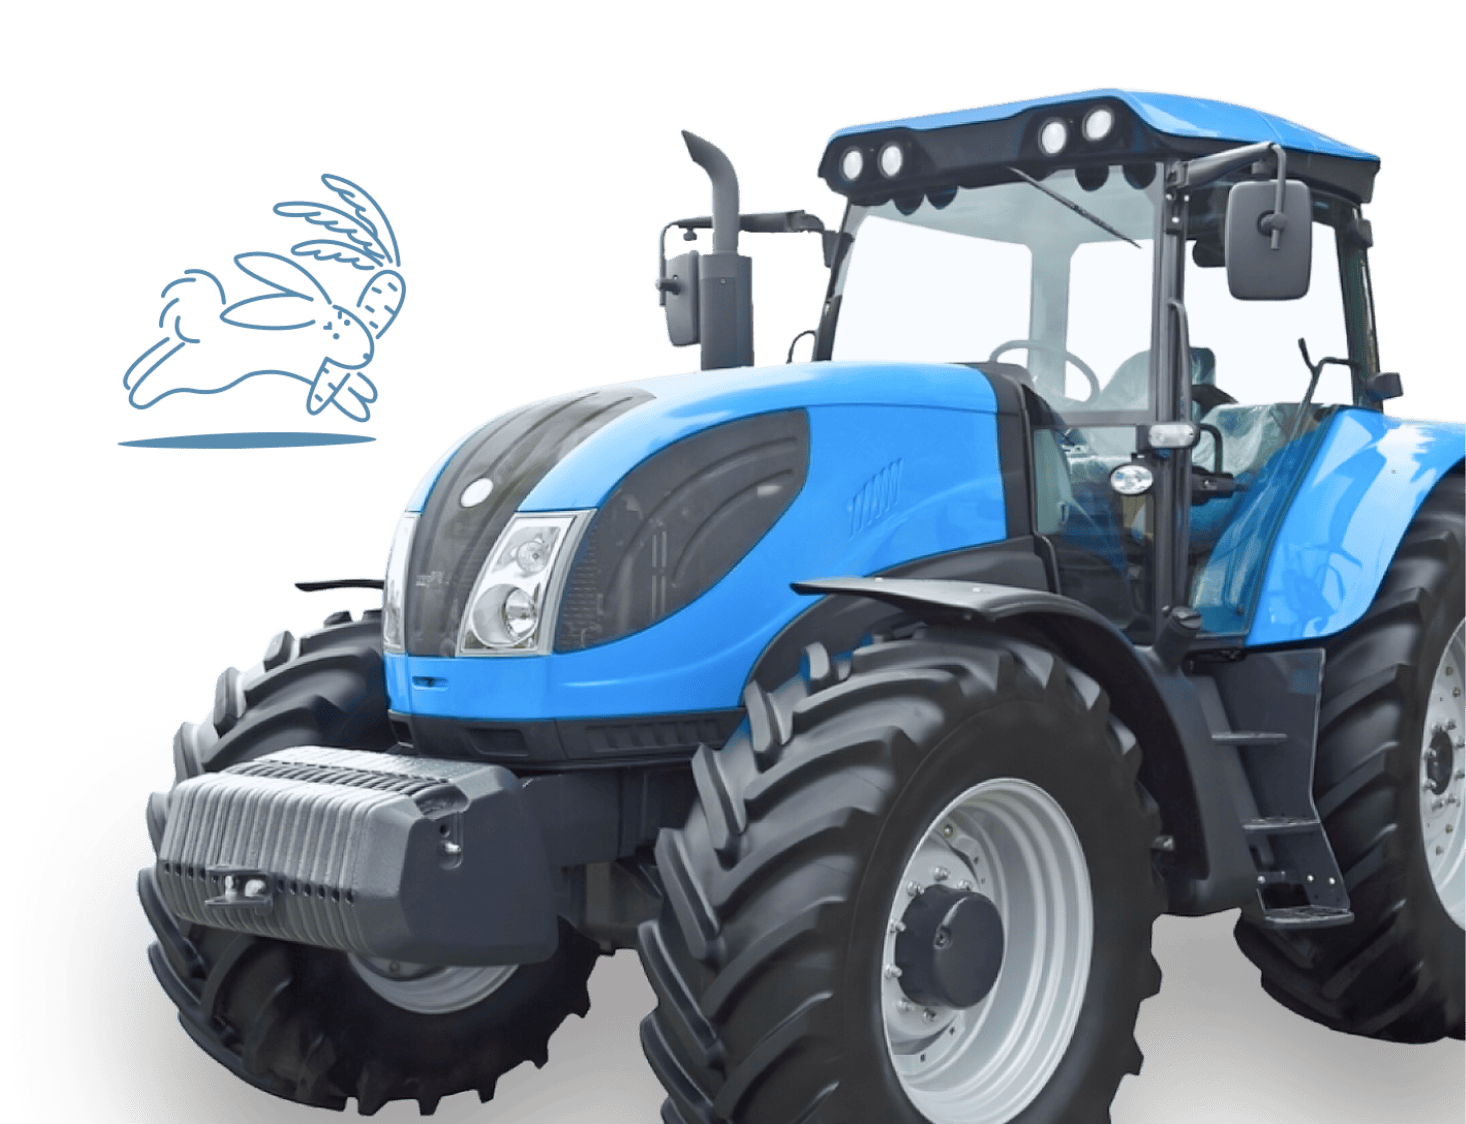 Insurance of agricultural machinery